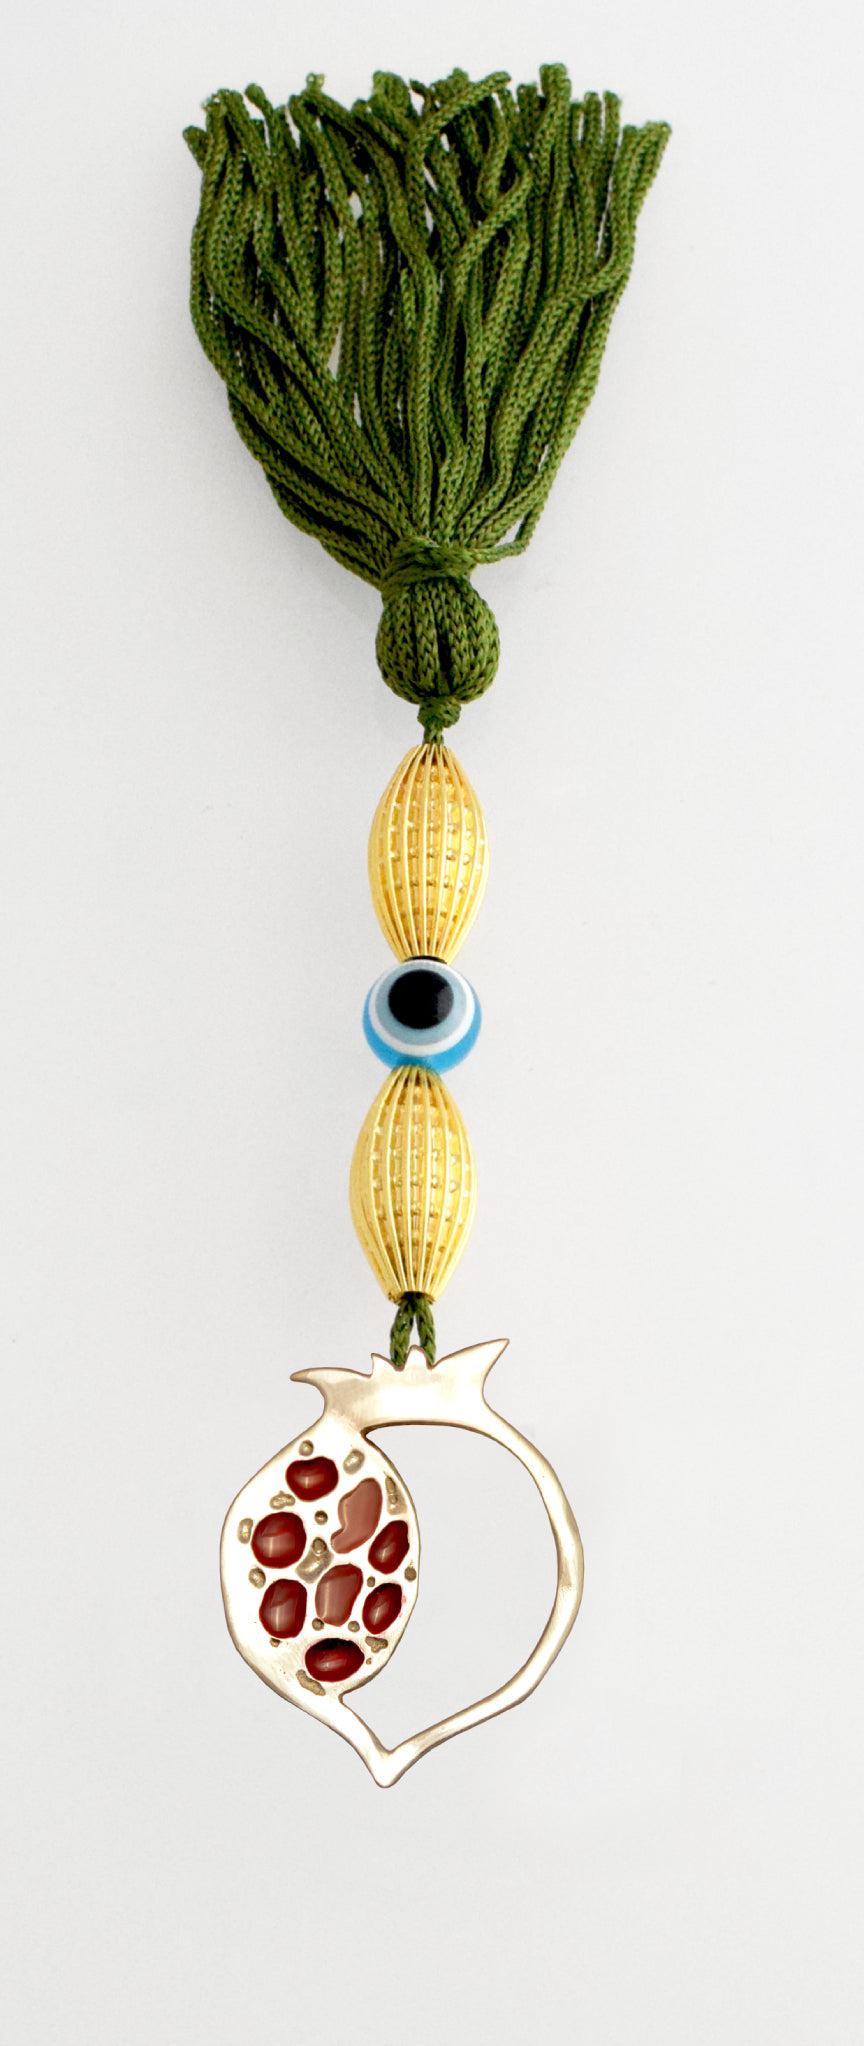 Evil Eye Charm on a tassel, House decoration, holiday decor, welcome gift, silver charm, Pomegranate Charm